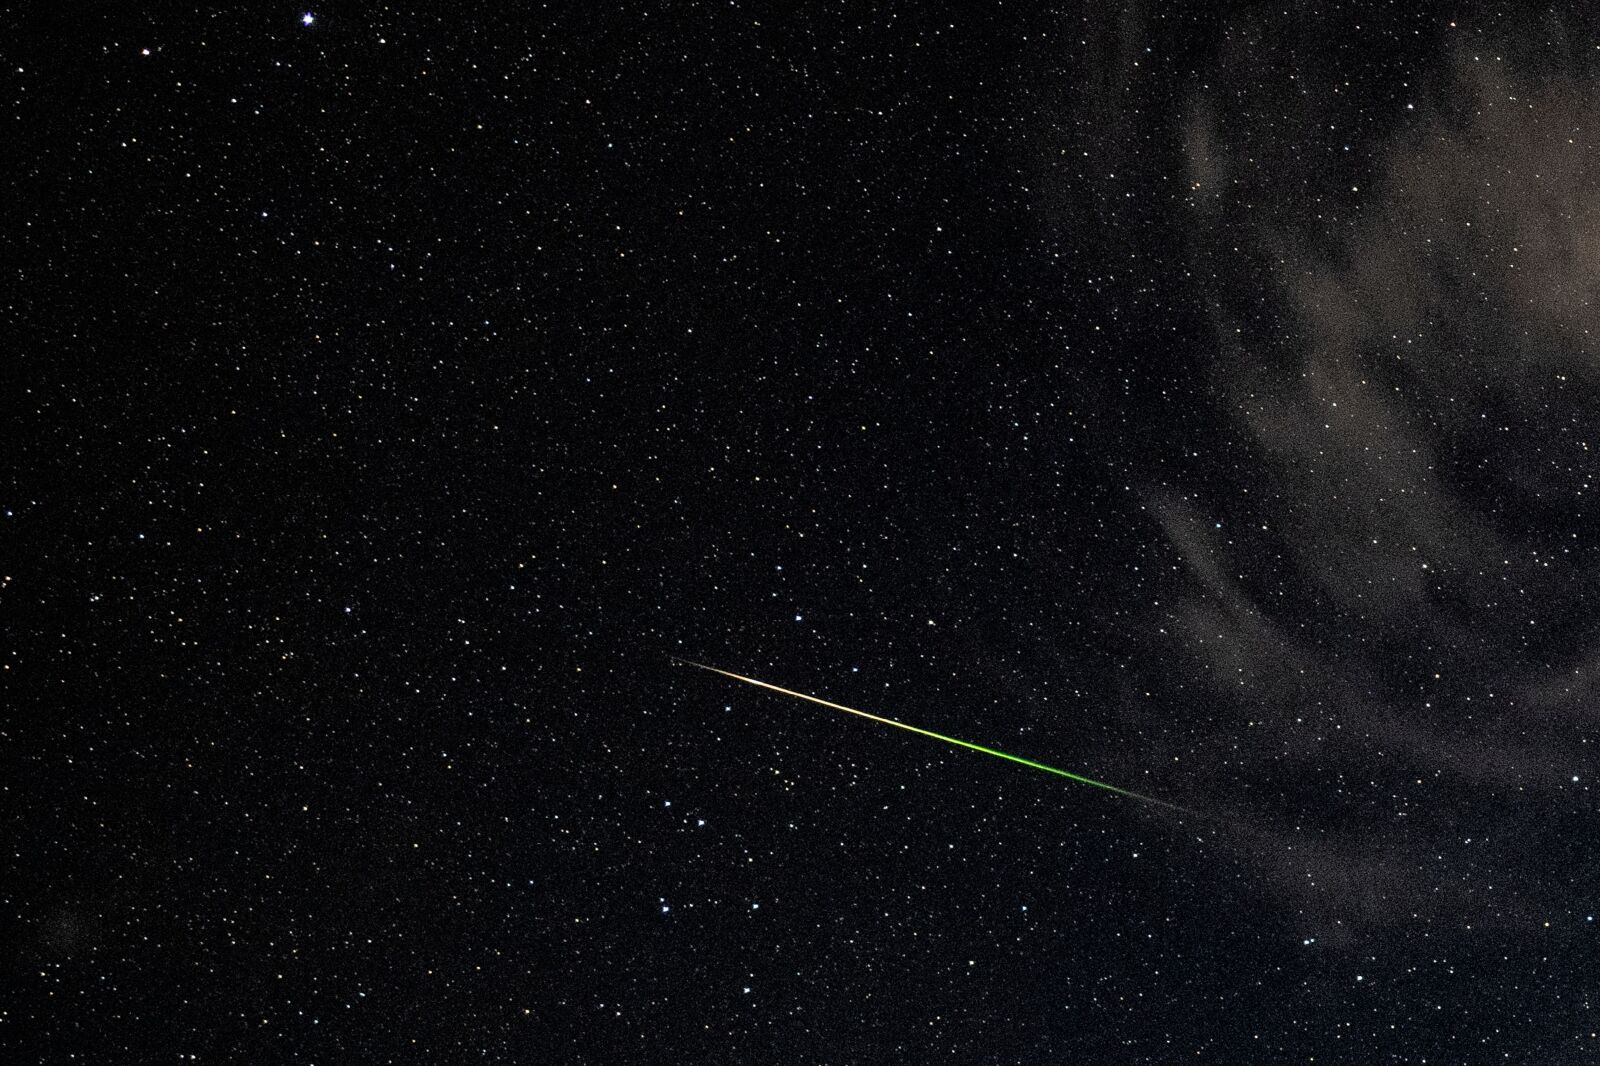 Eta Aquarids meteor in night sky
one of the best showers on the astronomy calendar